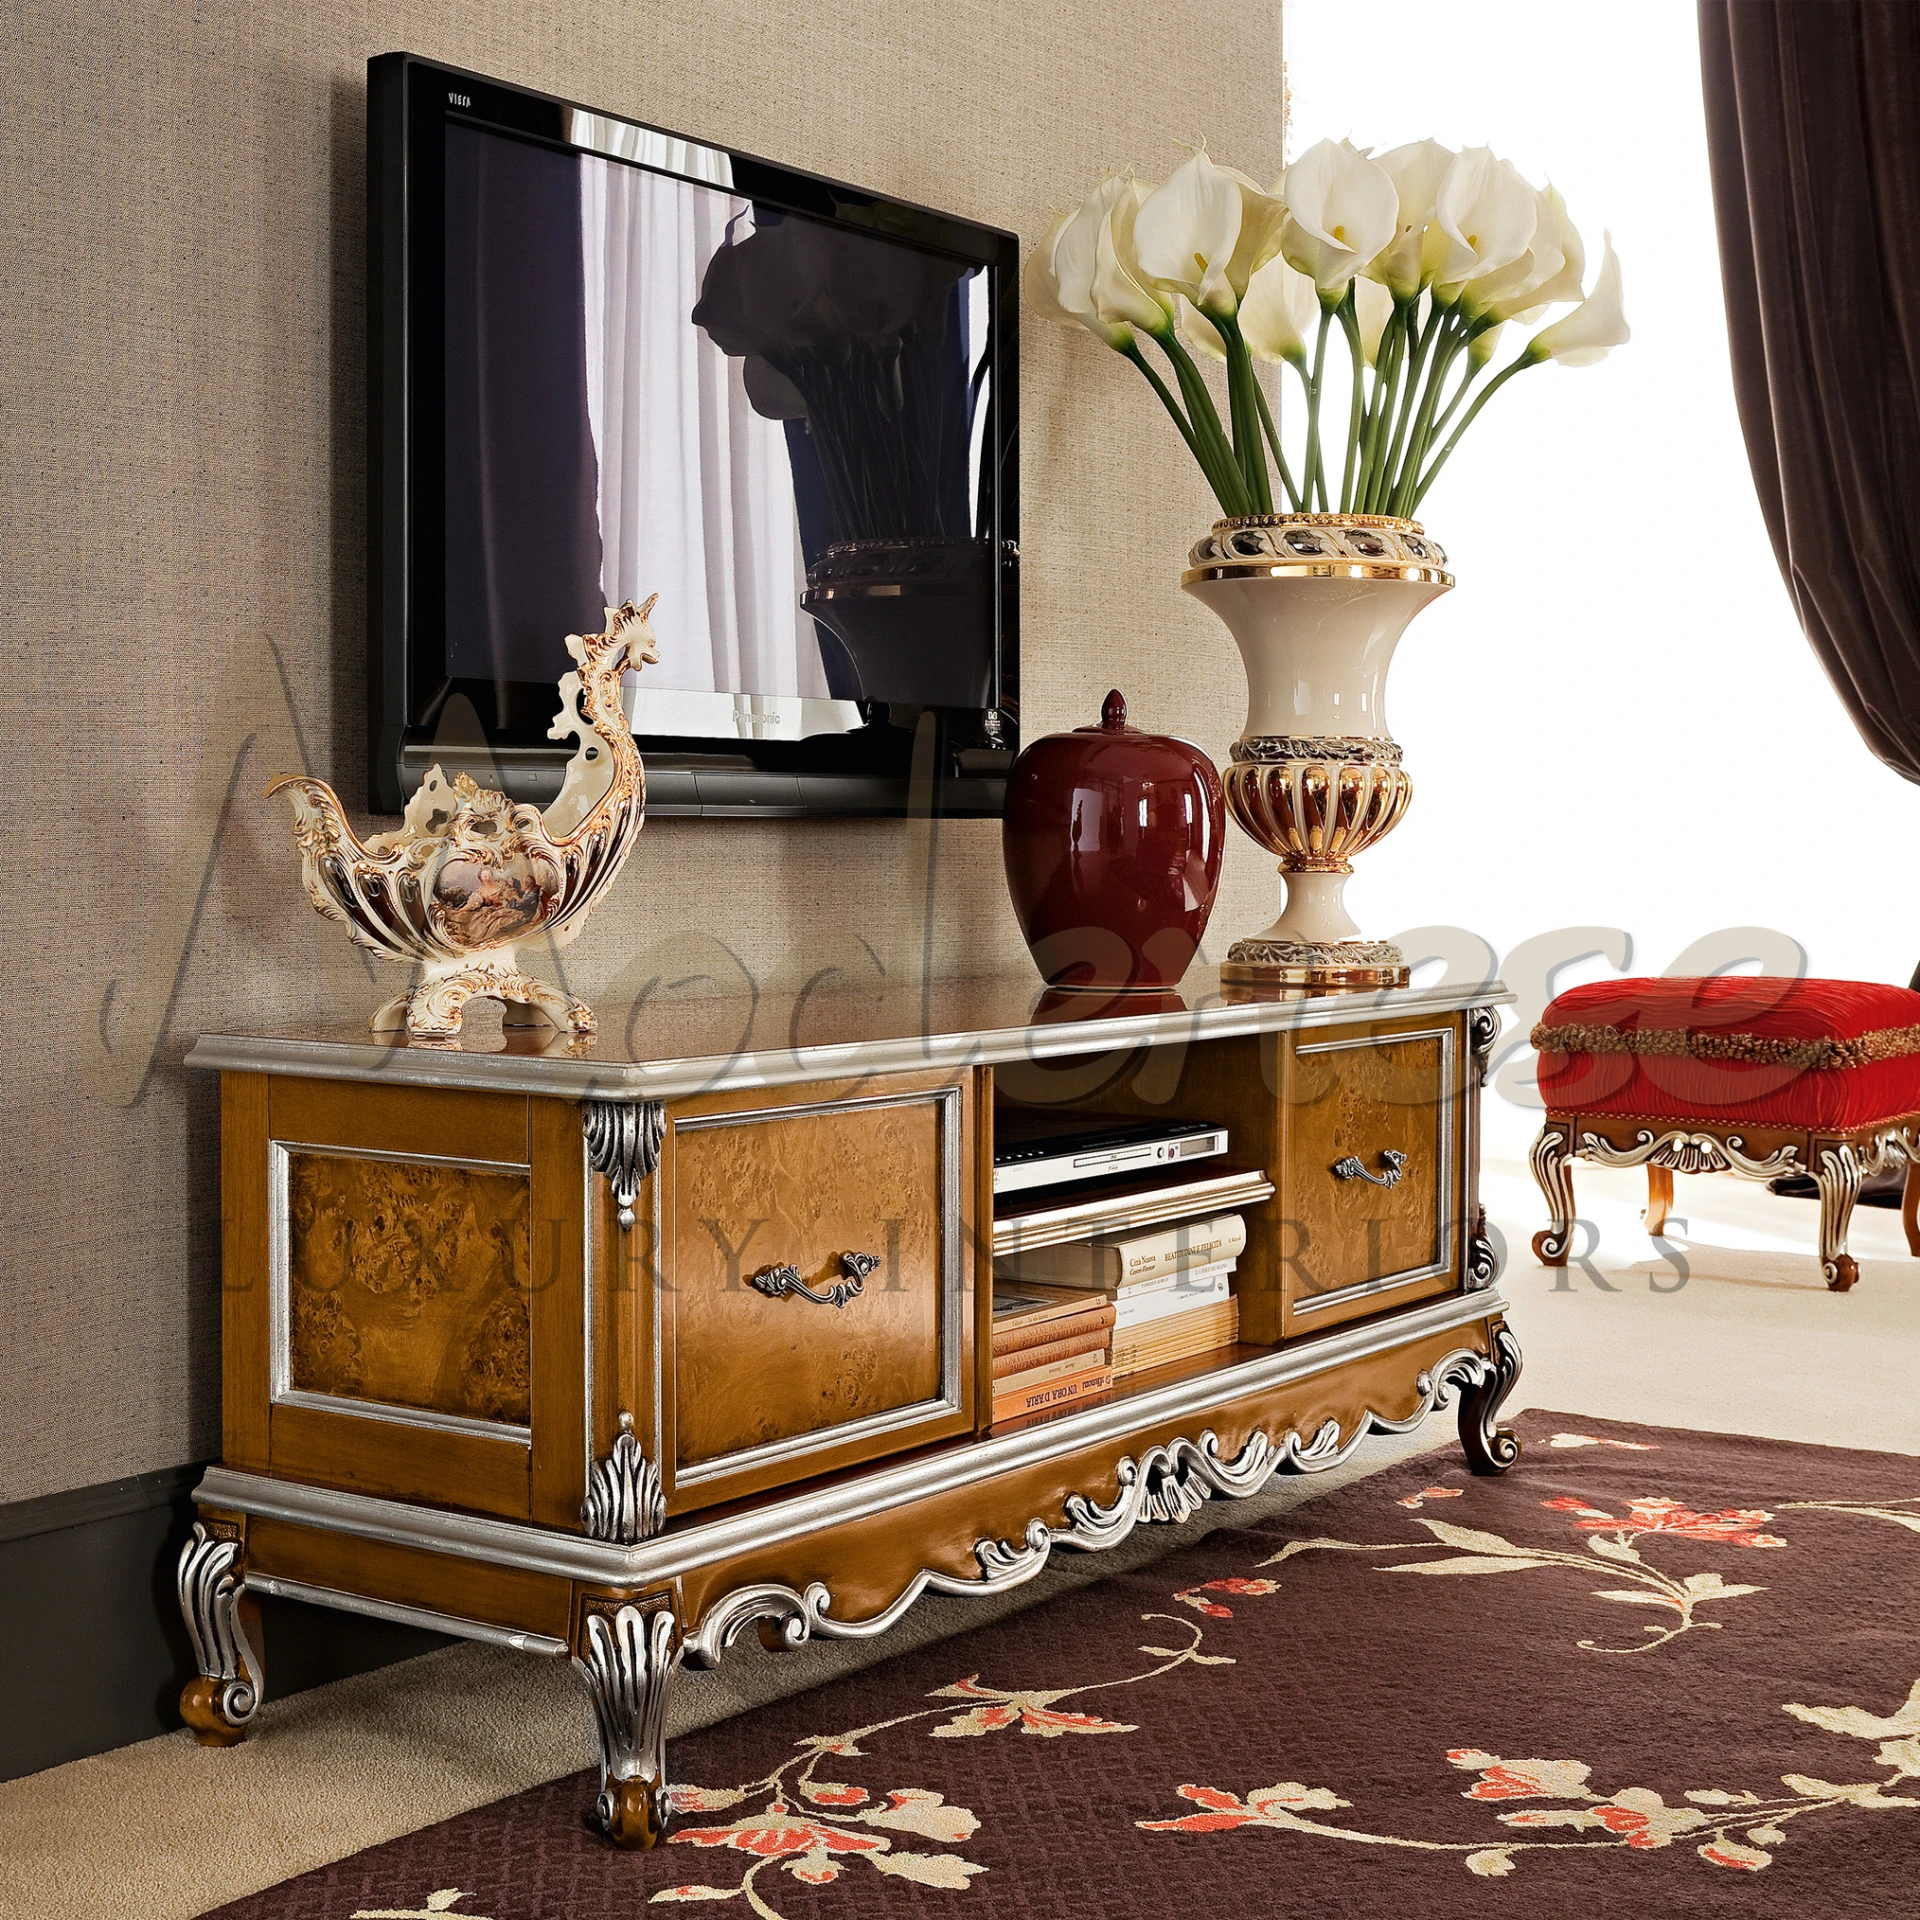 Luxury Classic TV Stand, solid wood craftsmanship, perfect for baroque style and luxury interiors with Italian design.
